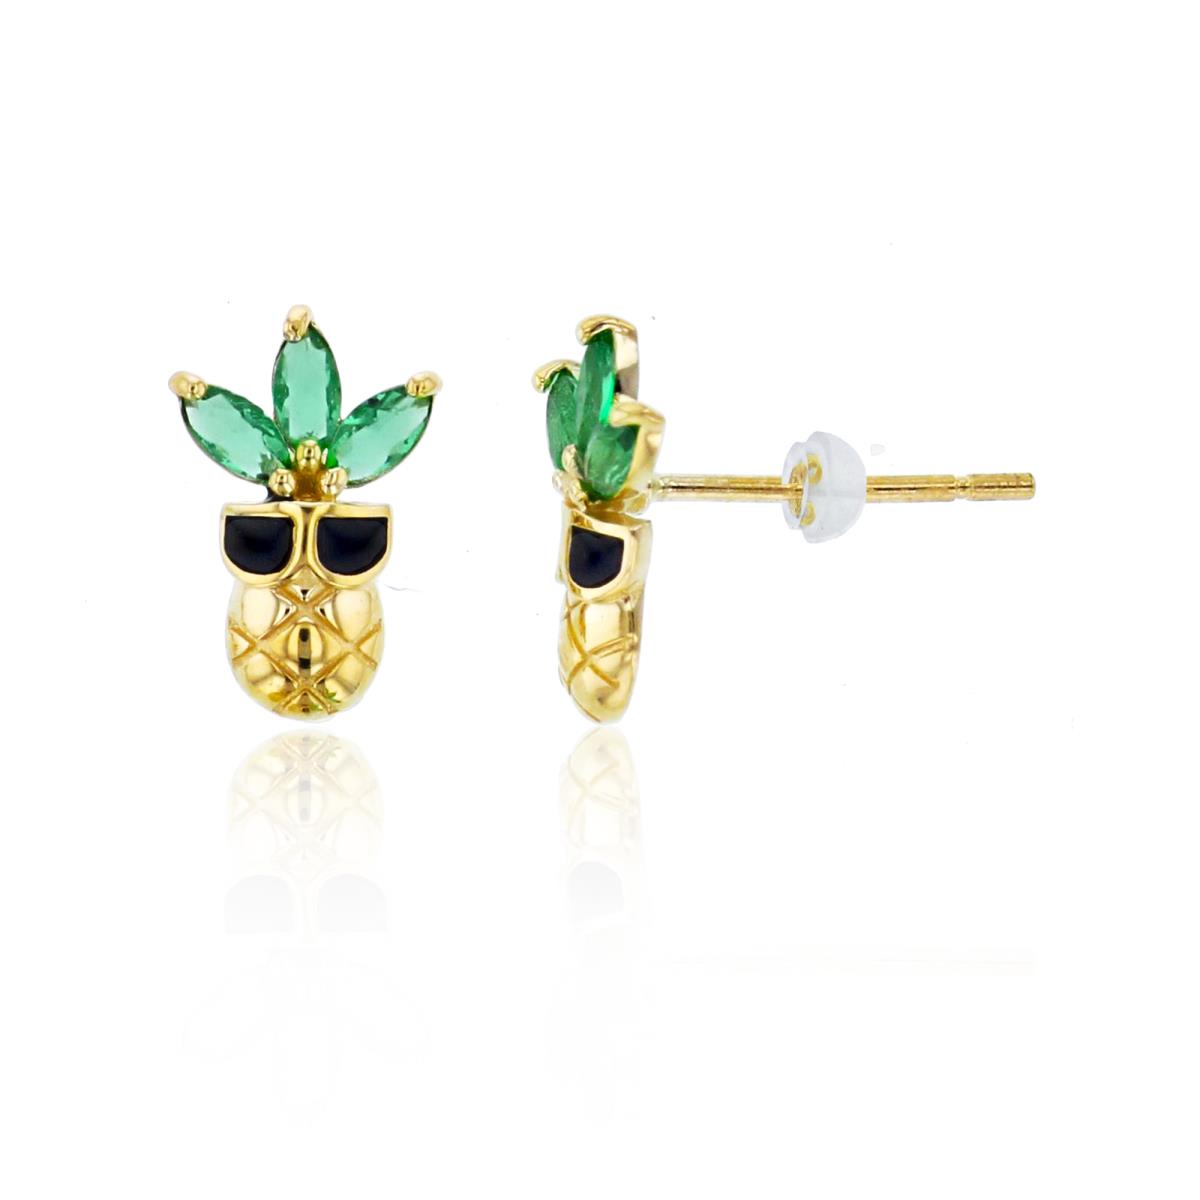 10K Yellow Gold Pineapple with Green CZ Leaves & Black Enamel 9x6mm Sunglasses Studs with Silicone Backs